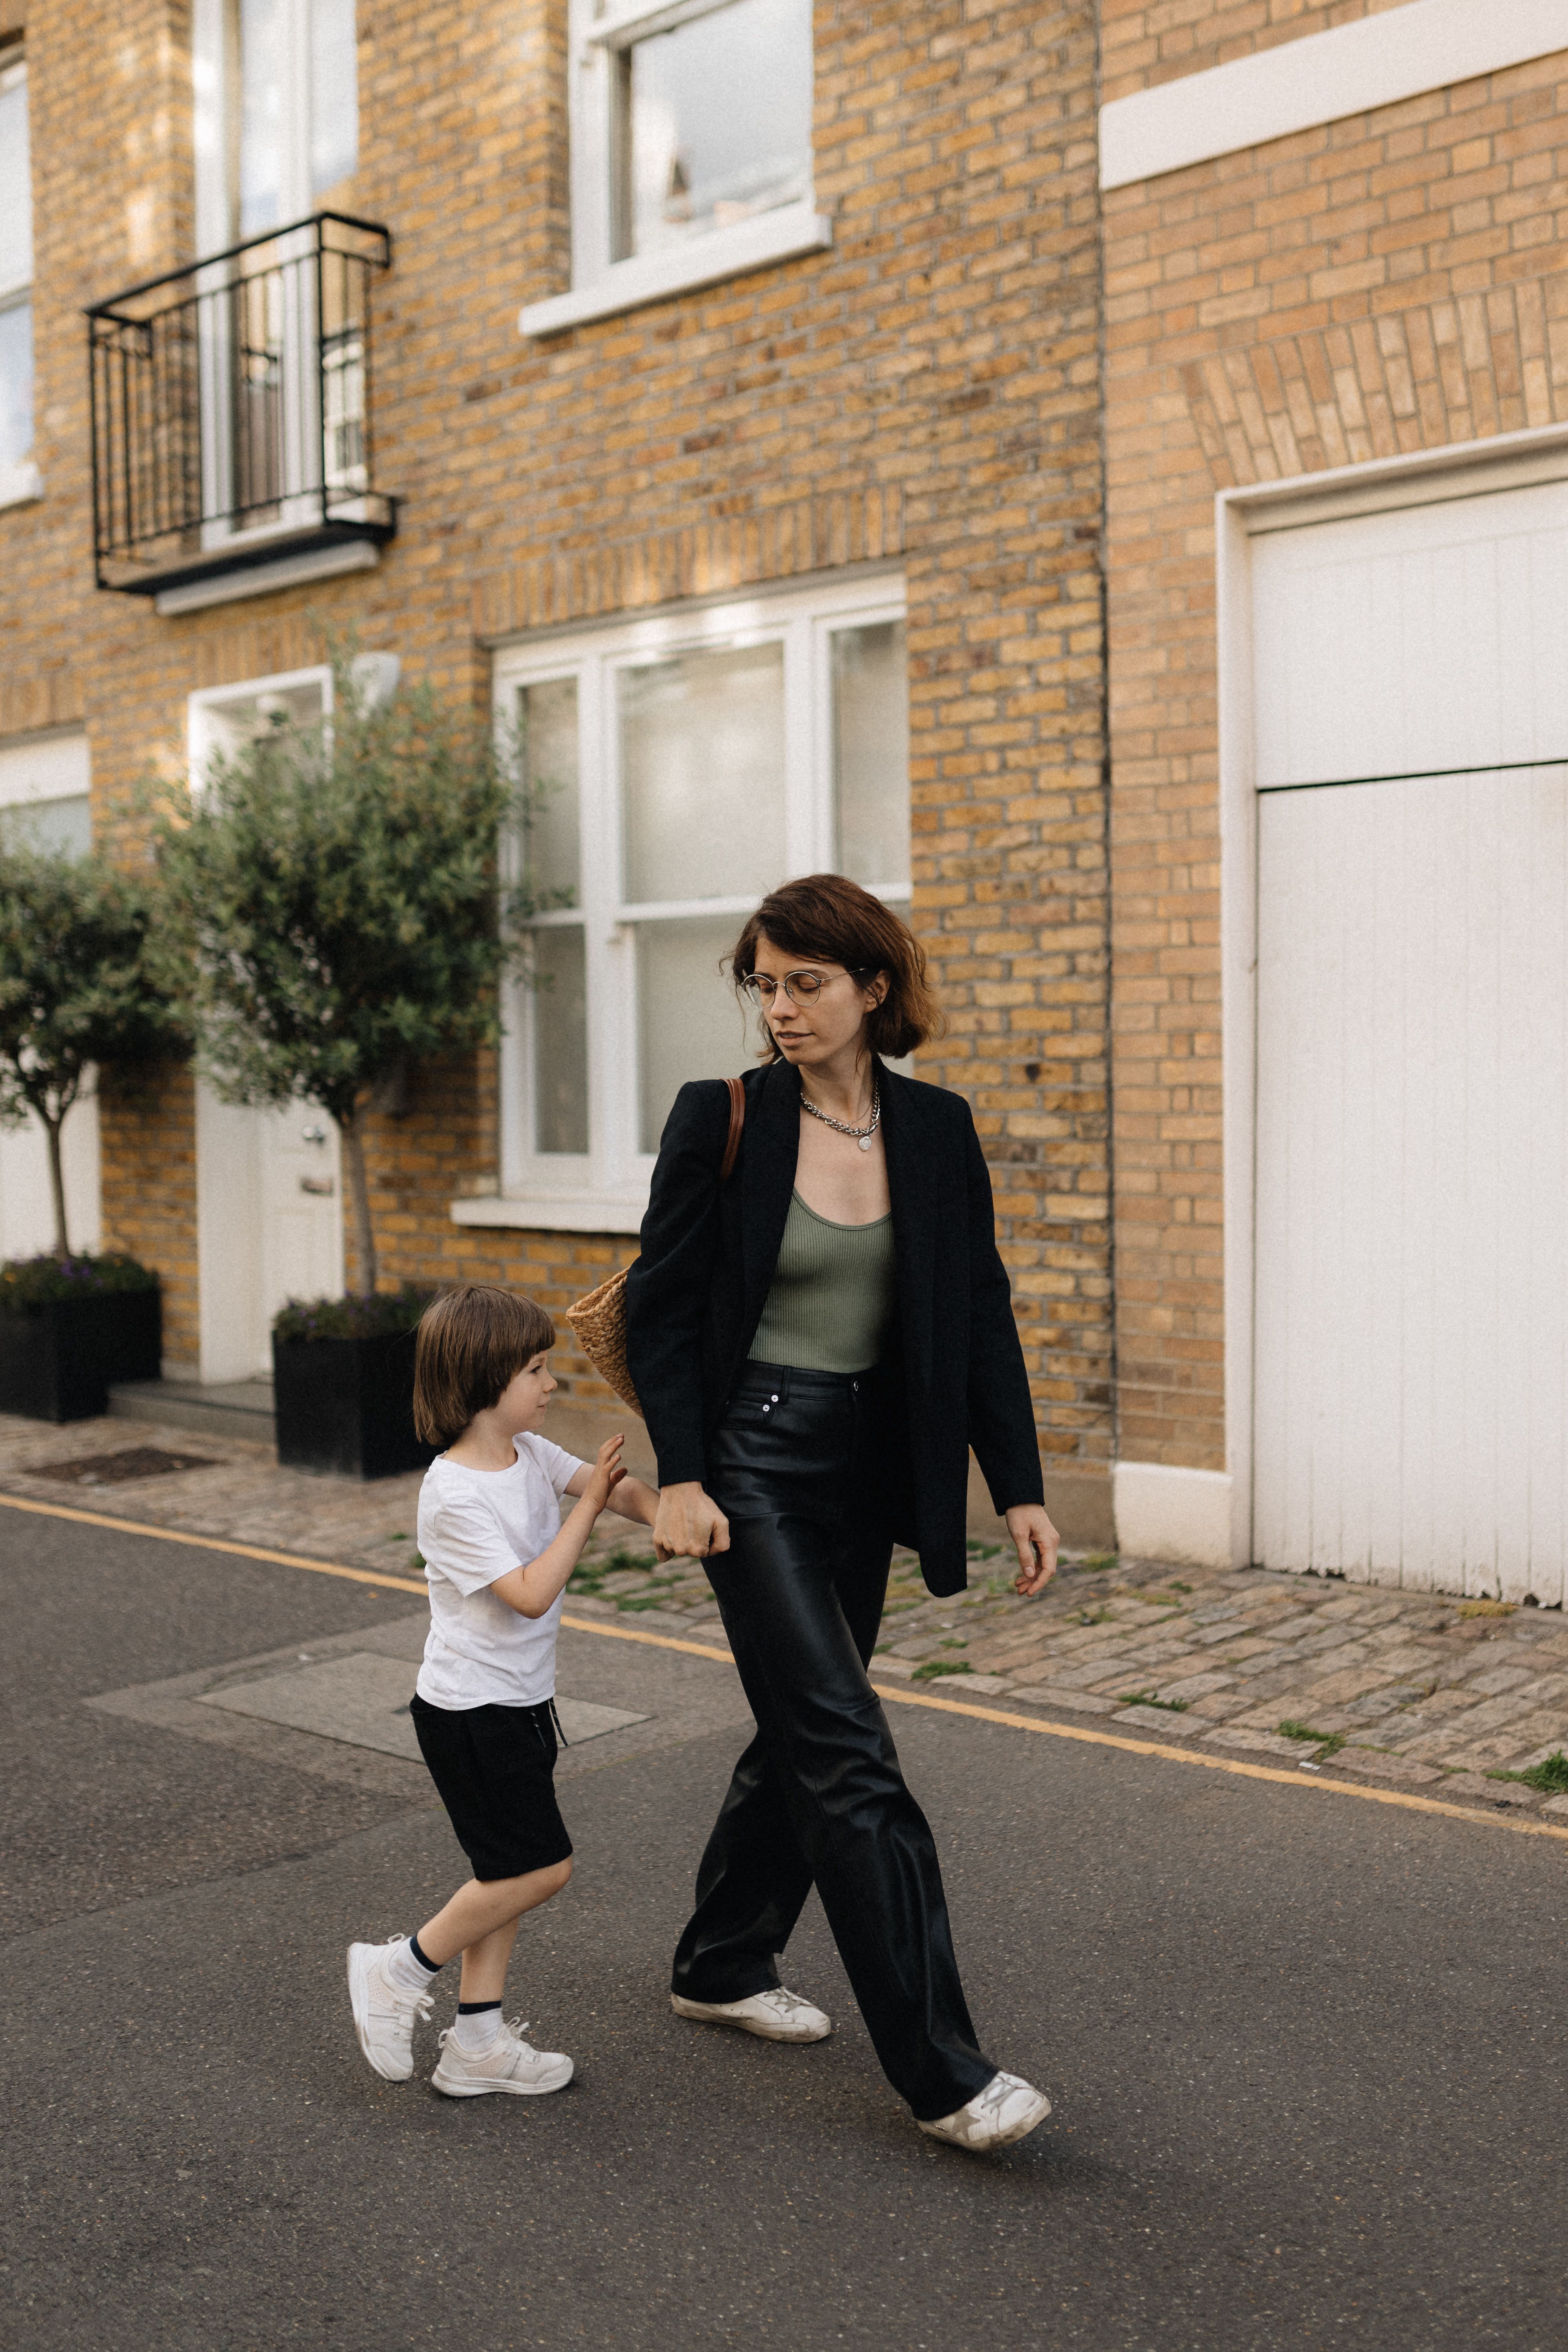 Photo of Ukrainian refugee Alisa Cooper and her son Kupriian. She is looking down at him as they walk through a terraced street in London. She has short brown hair and is wearing a black blazer and a green vest top.